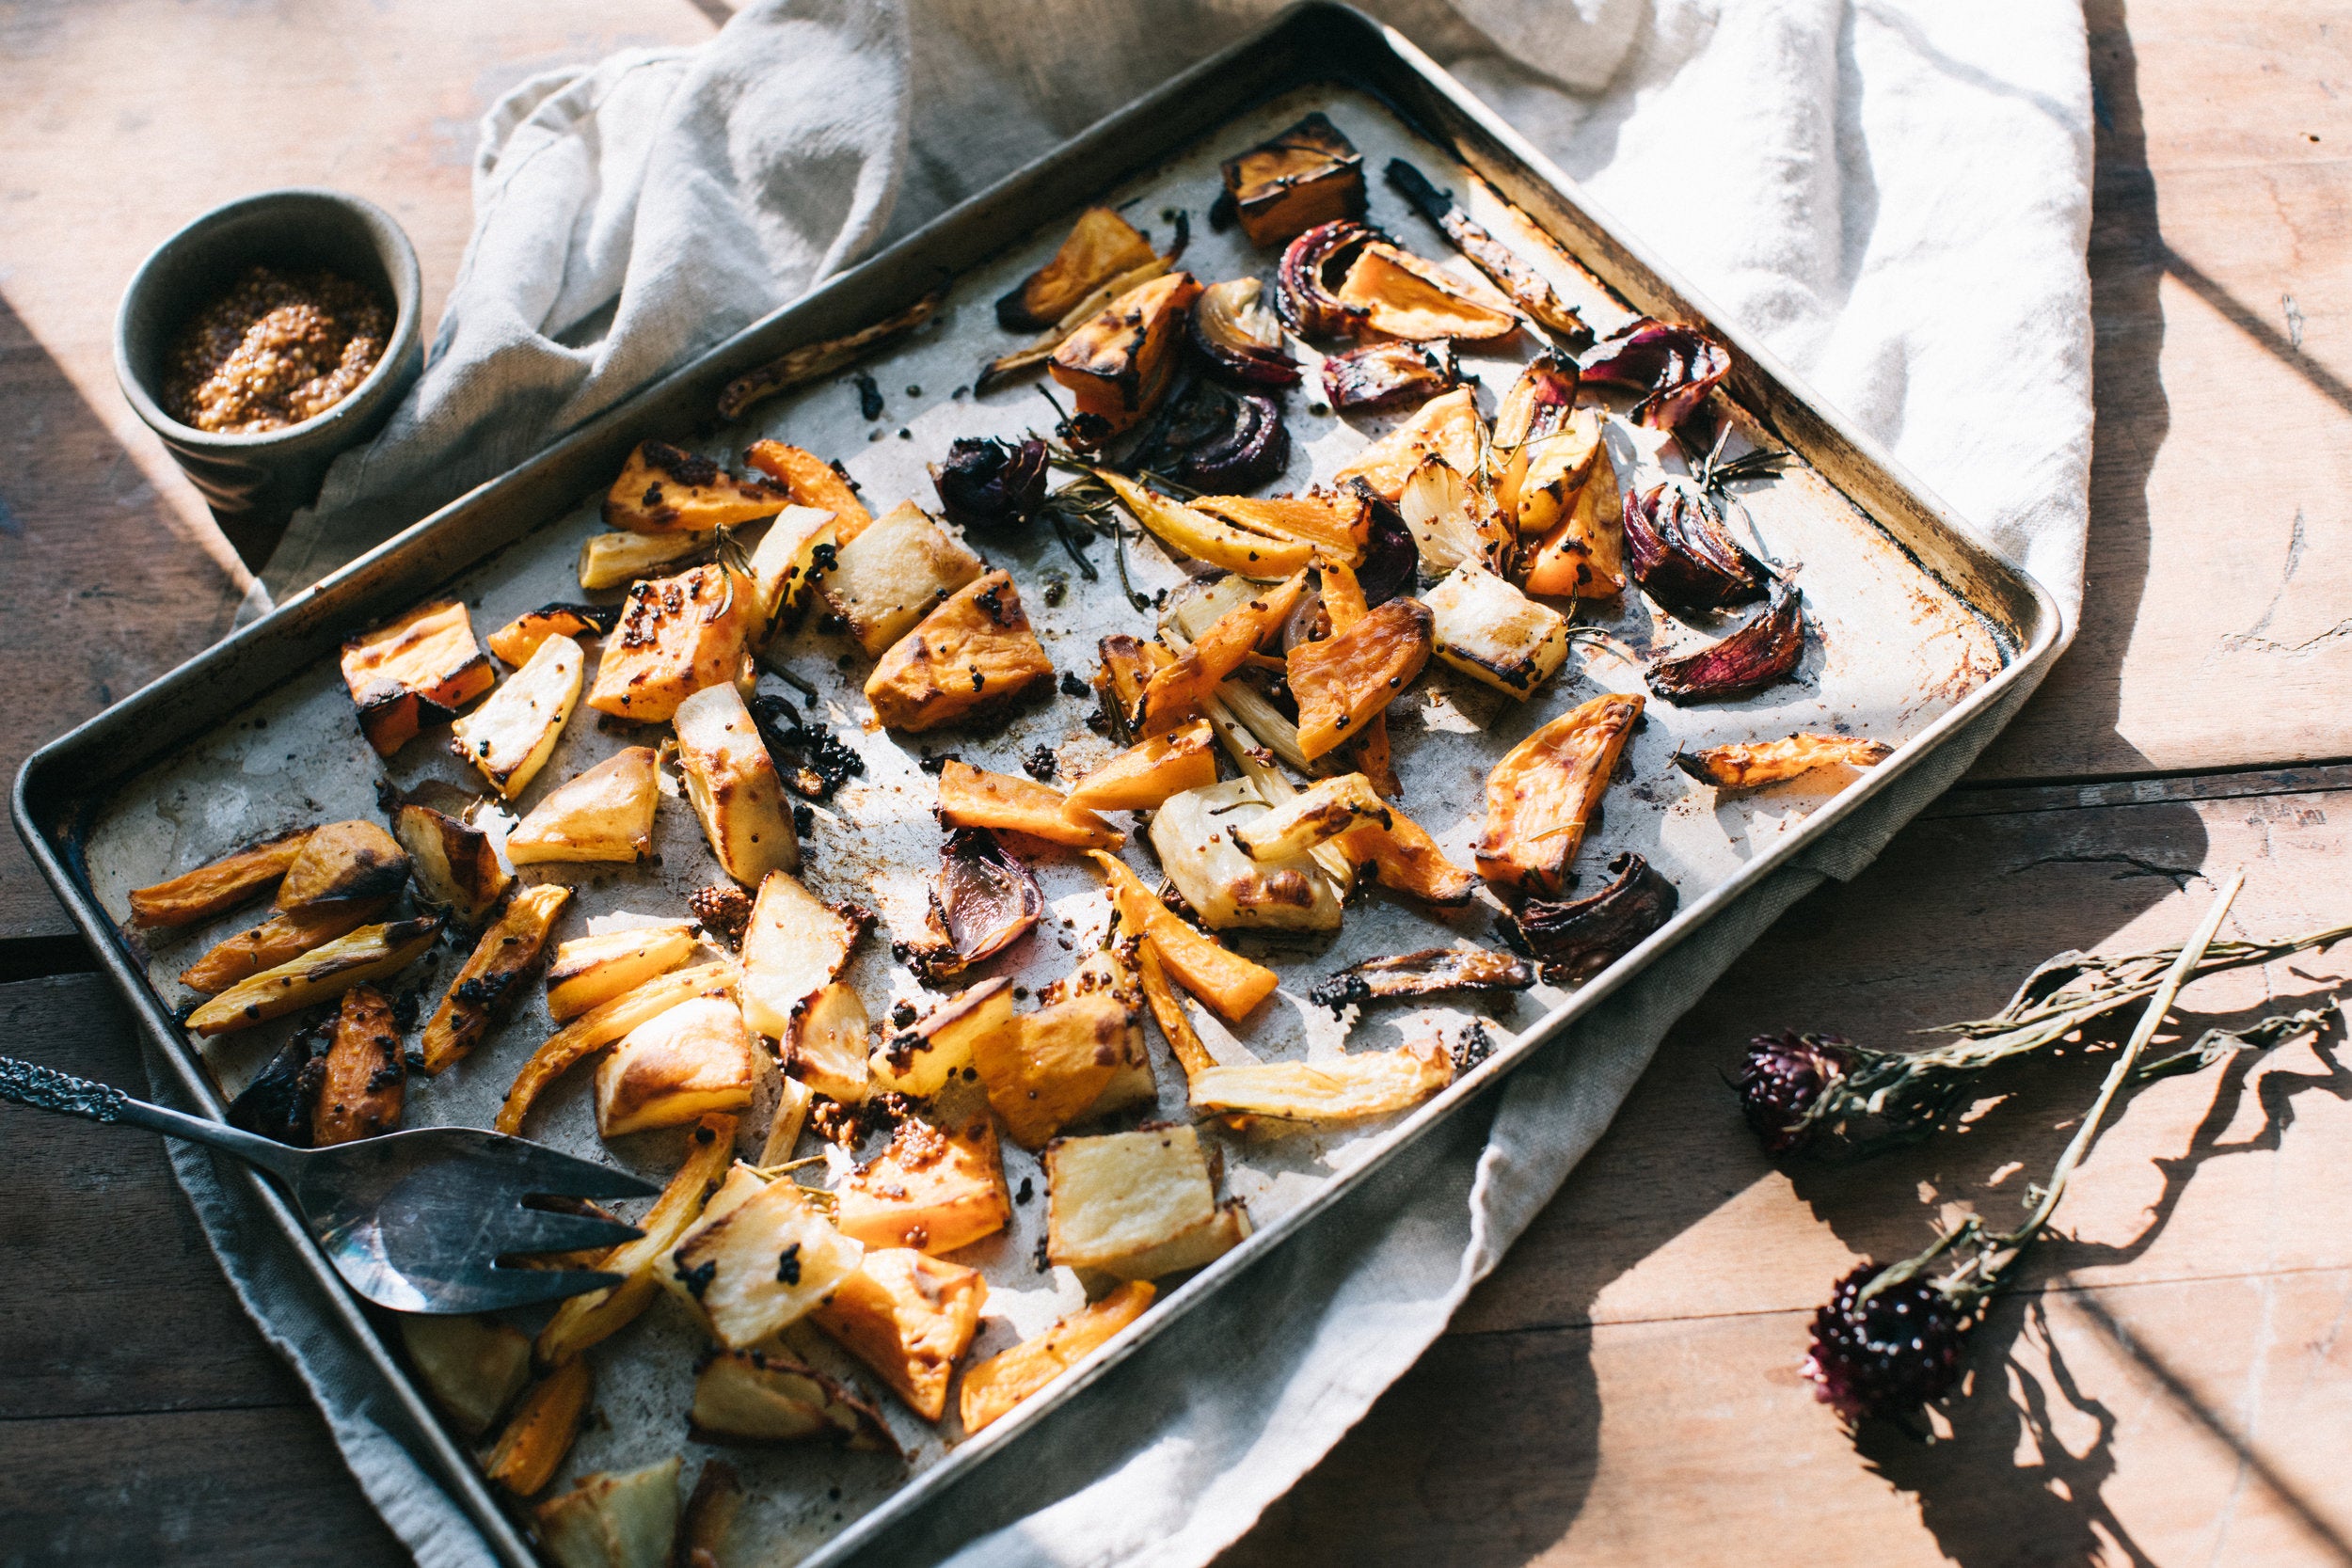 Herb Roasted Root Vegetables with Grainy Mustard